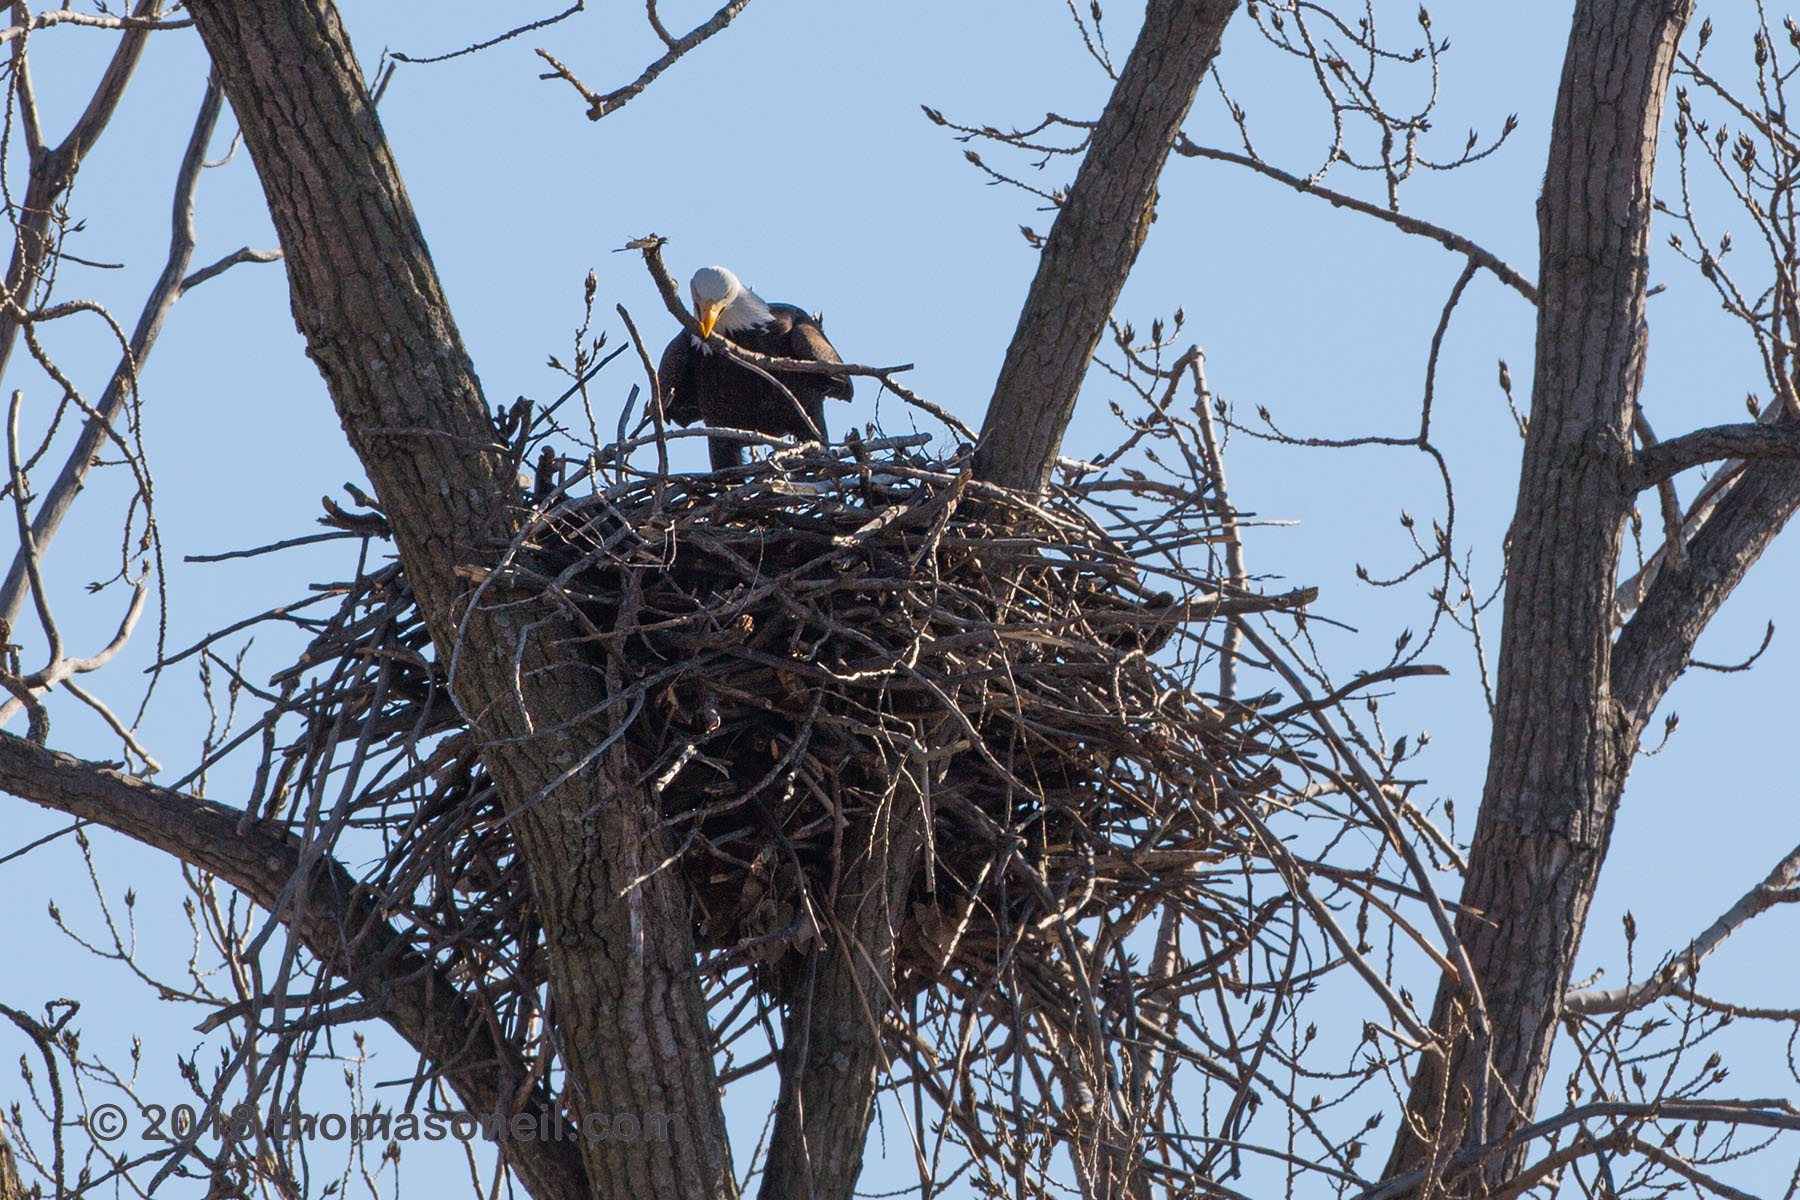 Bald eagle placing stick in the nest, Loess Bluffs National Wildlife Refuge, Missouri, December 2018.  Click for next photo.